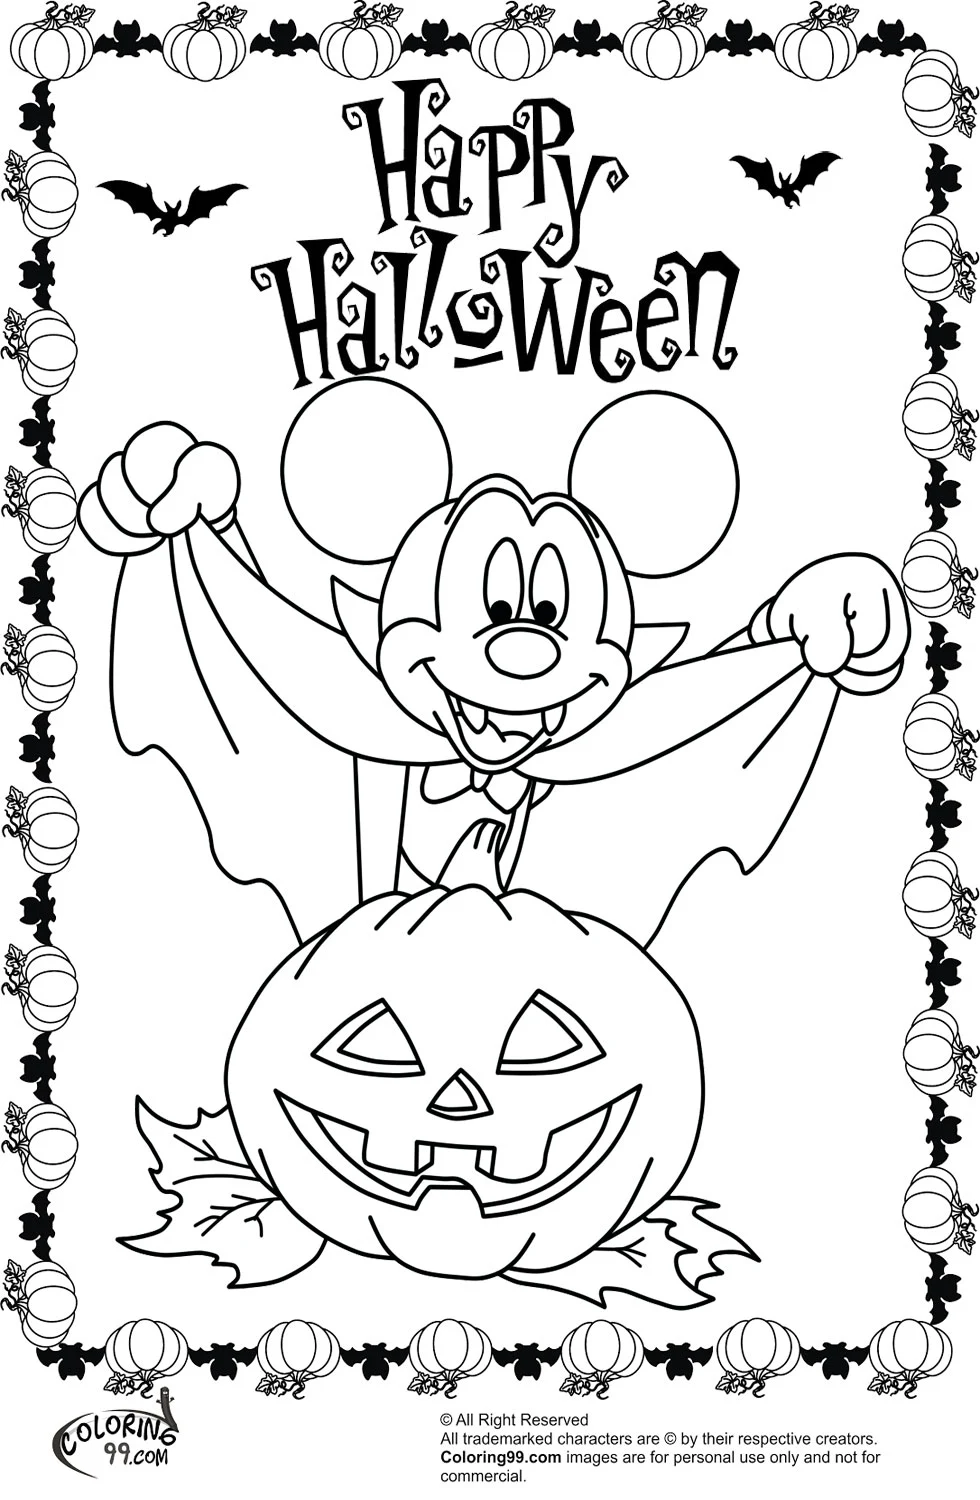 Minnie and Mickey Mouse Coloring Pages for Halloween Team colors